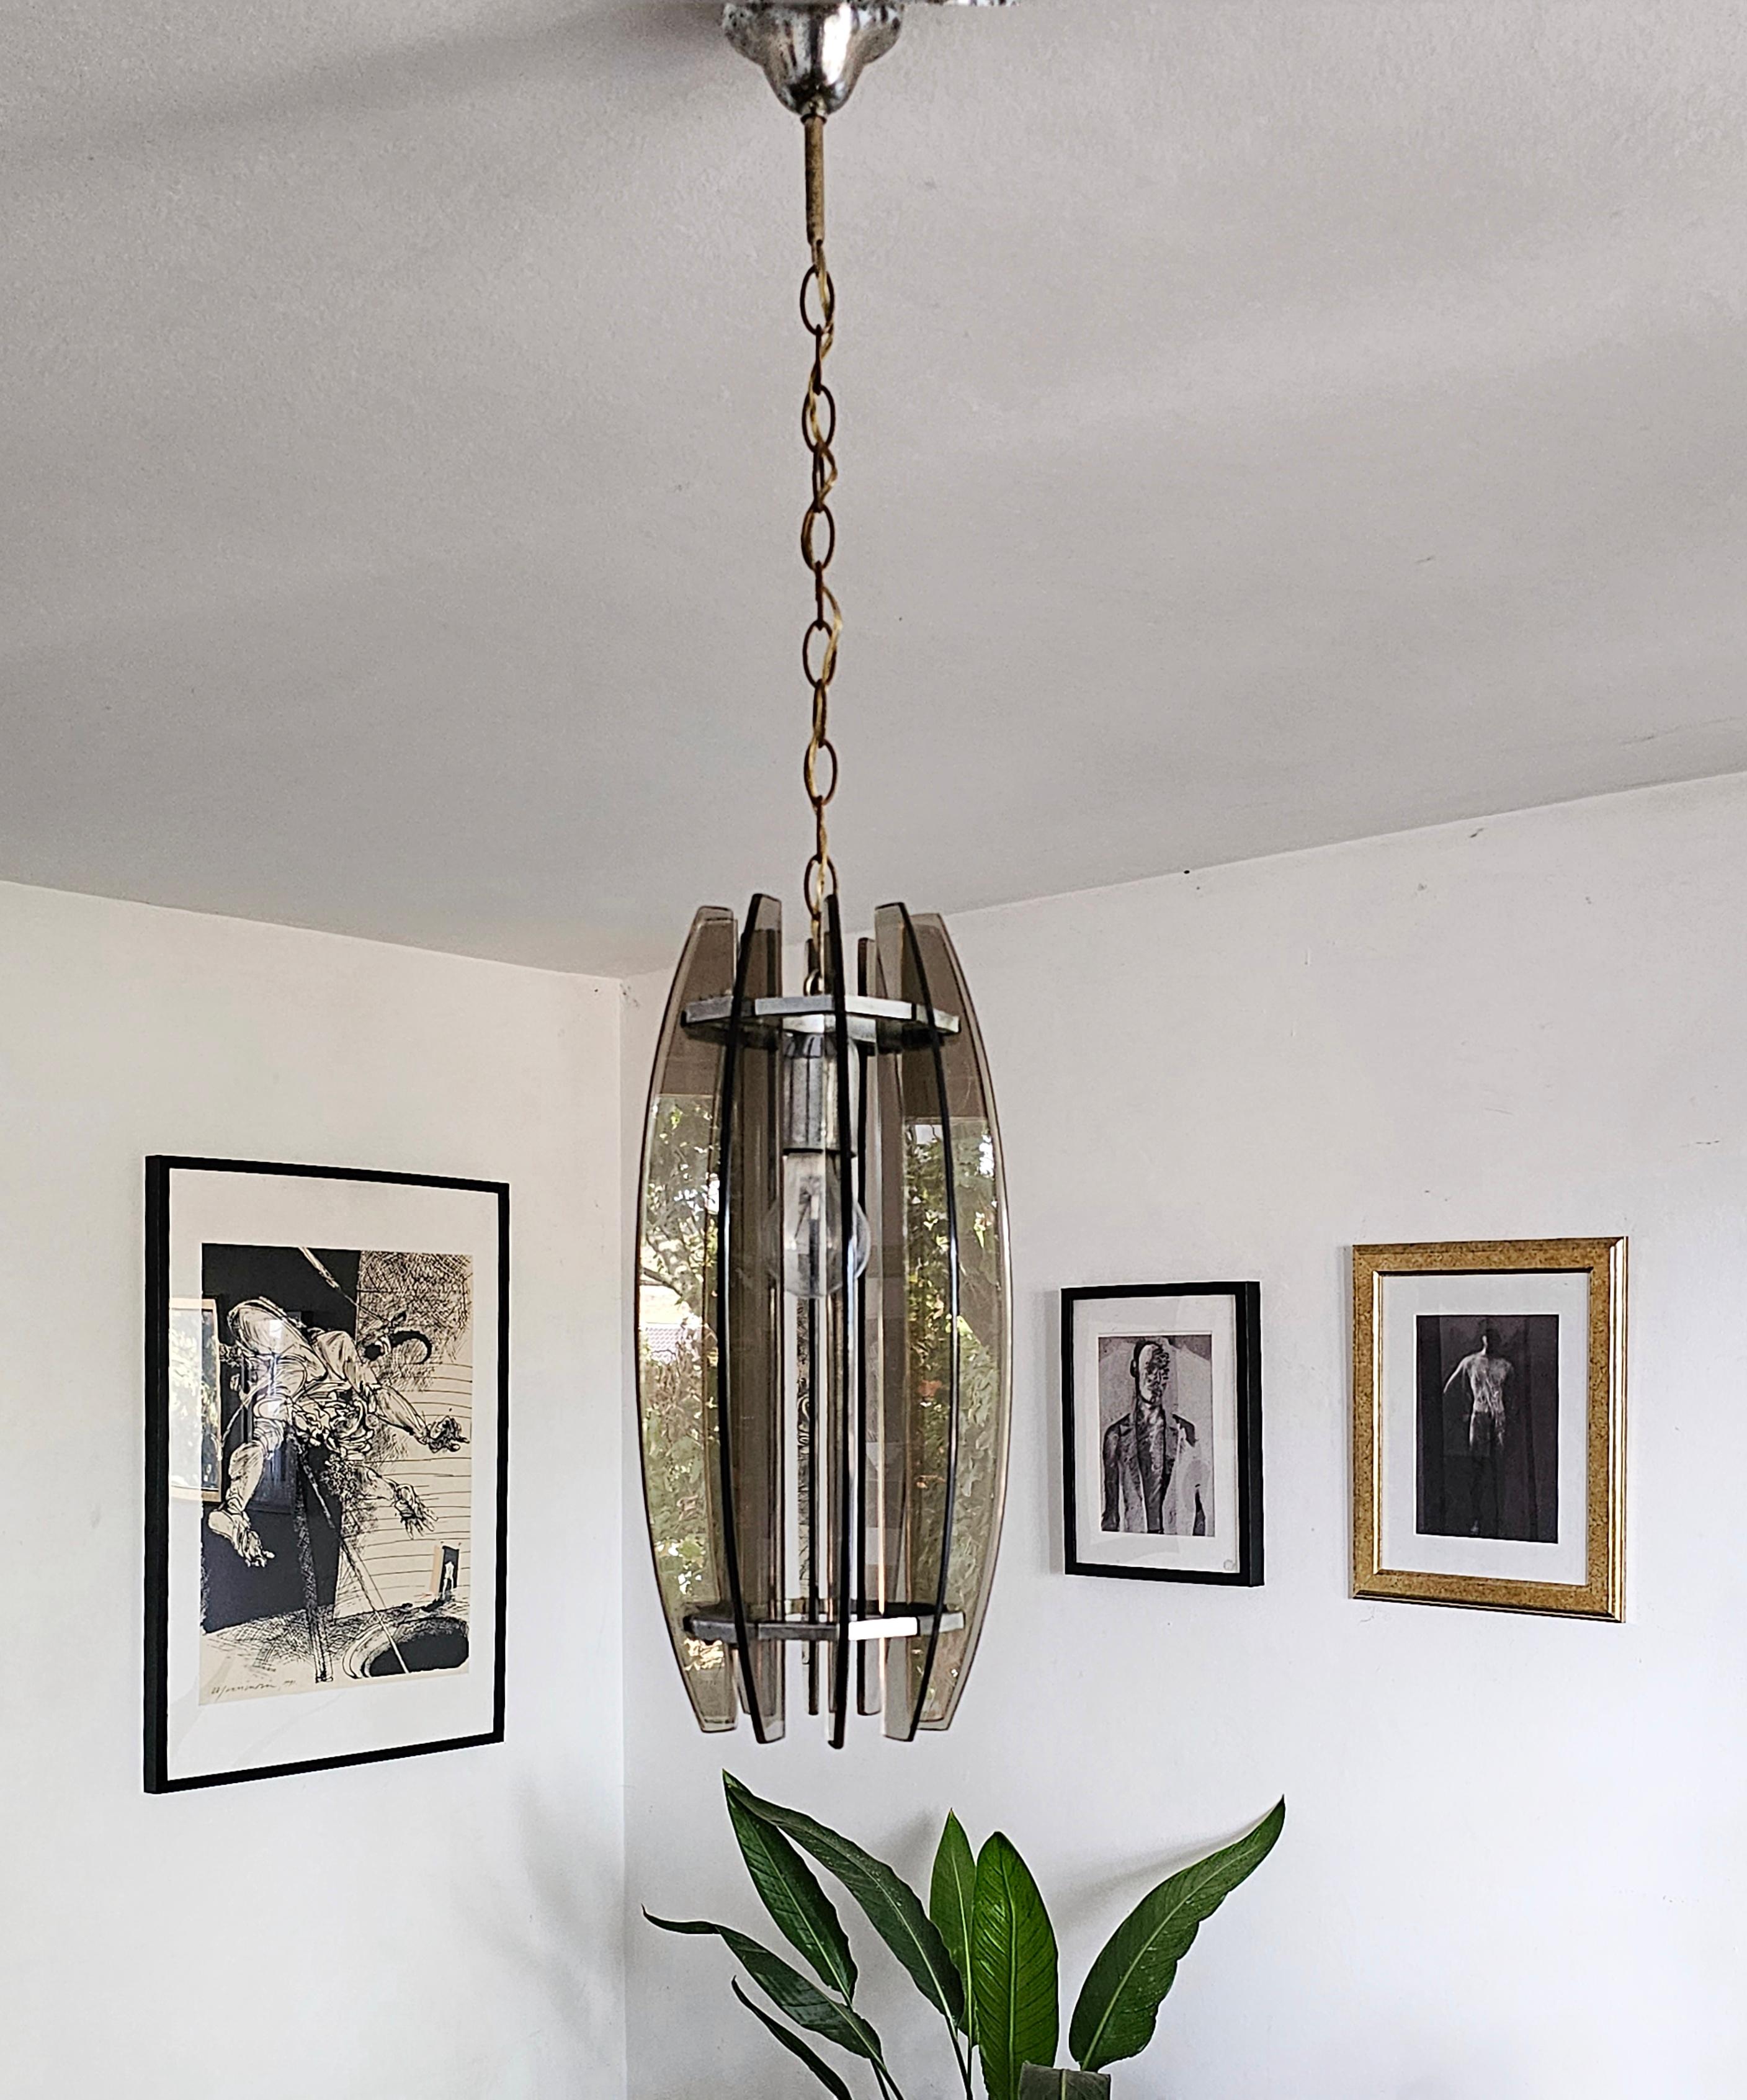 In this listing you will find a beautiful, small chandelier manufactured in style of Fontana Arte. It features chrome fixture with smoked Murano glass. Due to its size this piece of lighting is perfect for smaller spaces - hallways, kitchen,